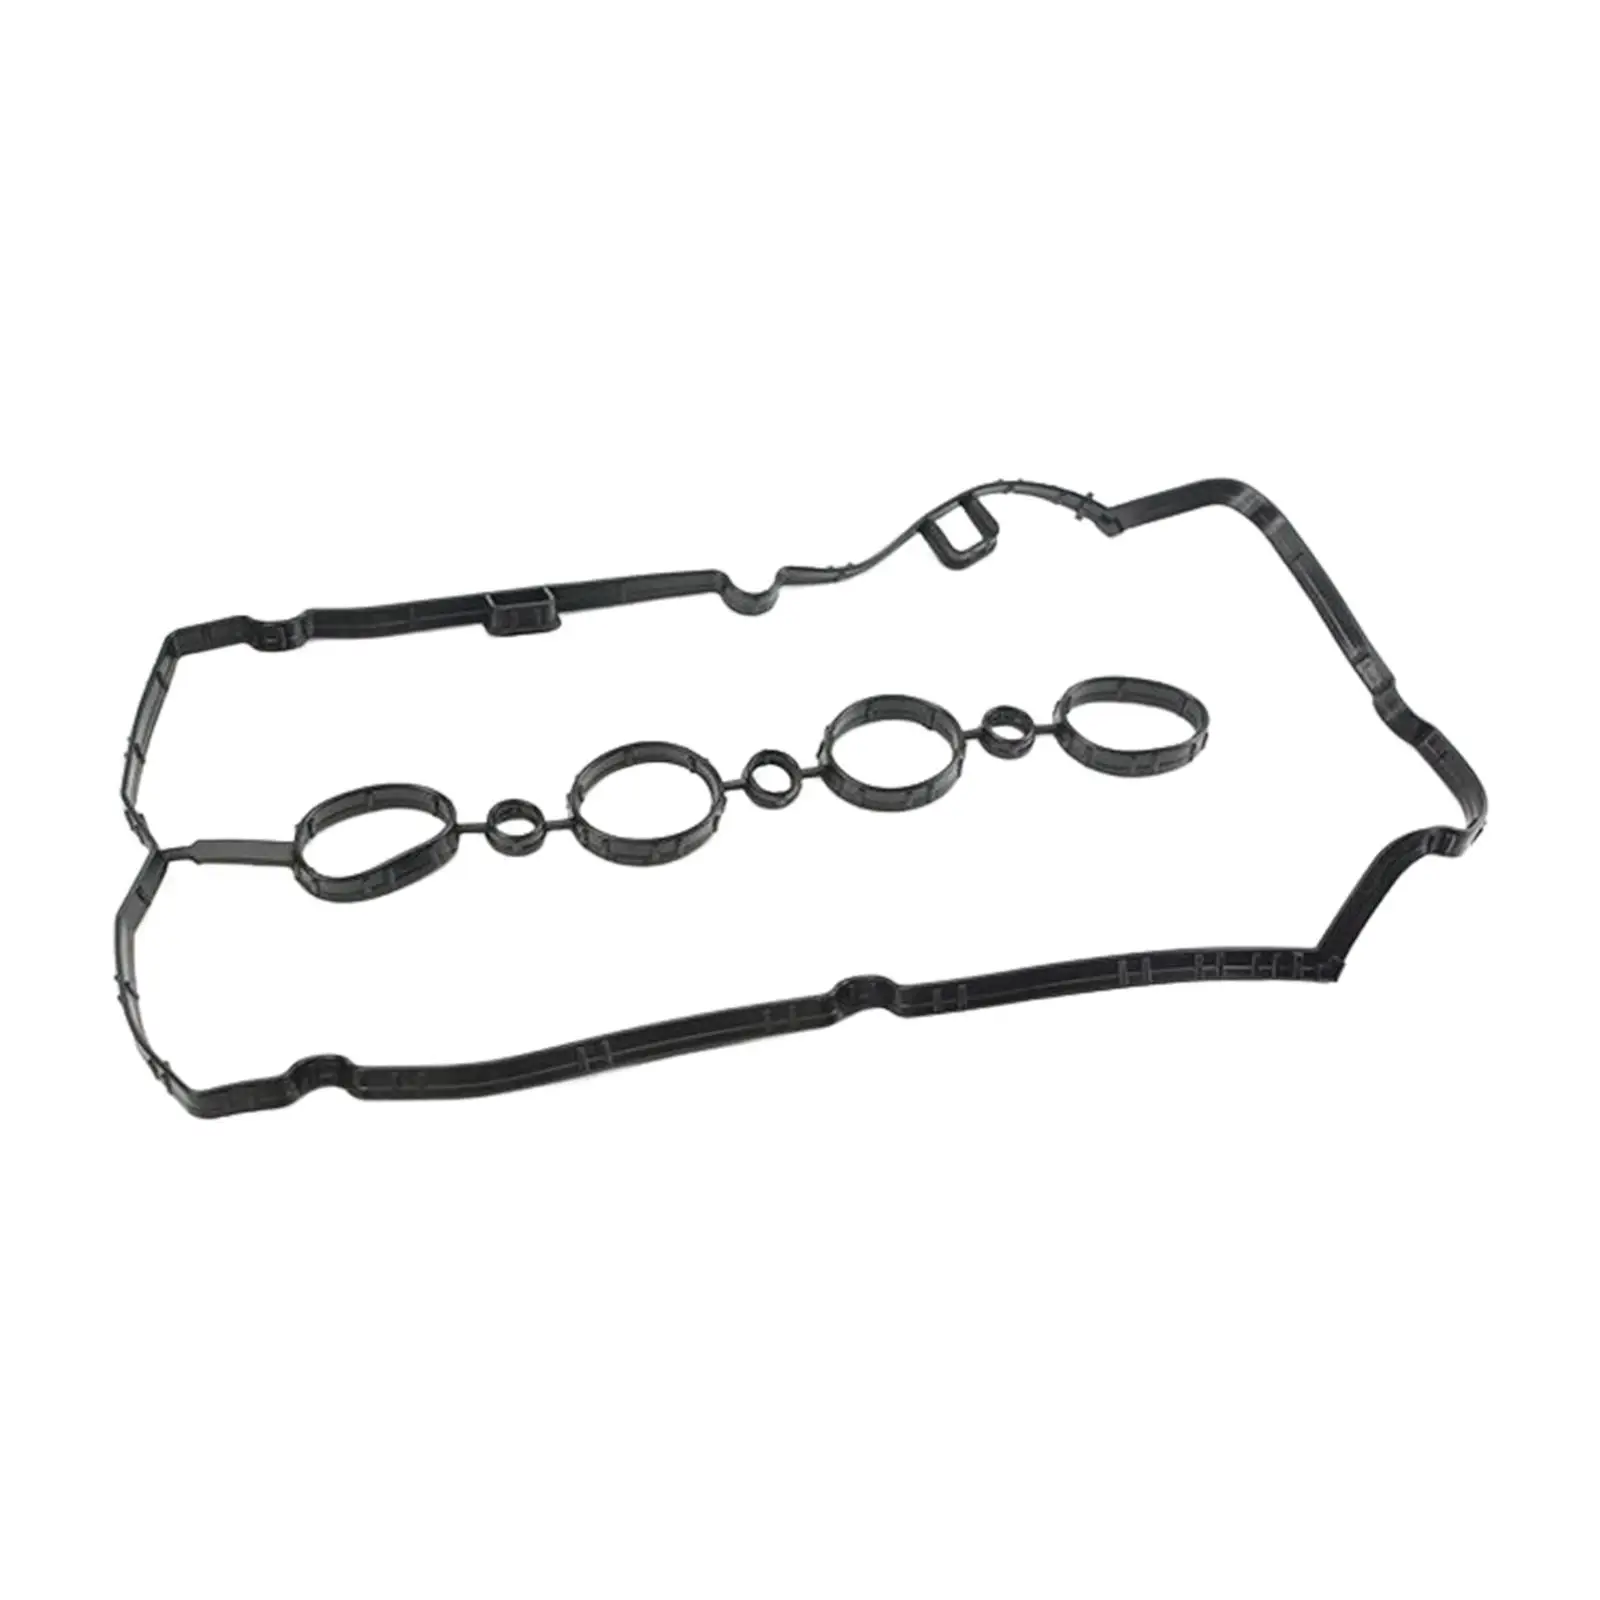 Automotive Engine Valve Cover Gasket 55354237 Accessory Rubber Fit for Chevrolet Aveo Aveo5 1.6L 1.8L